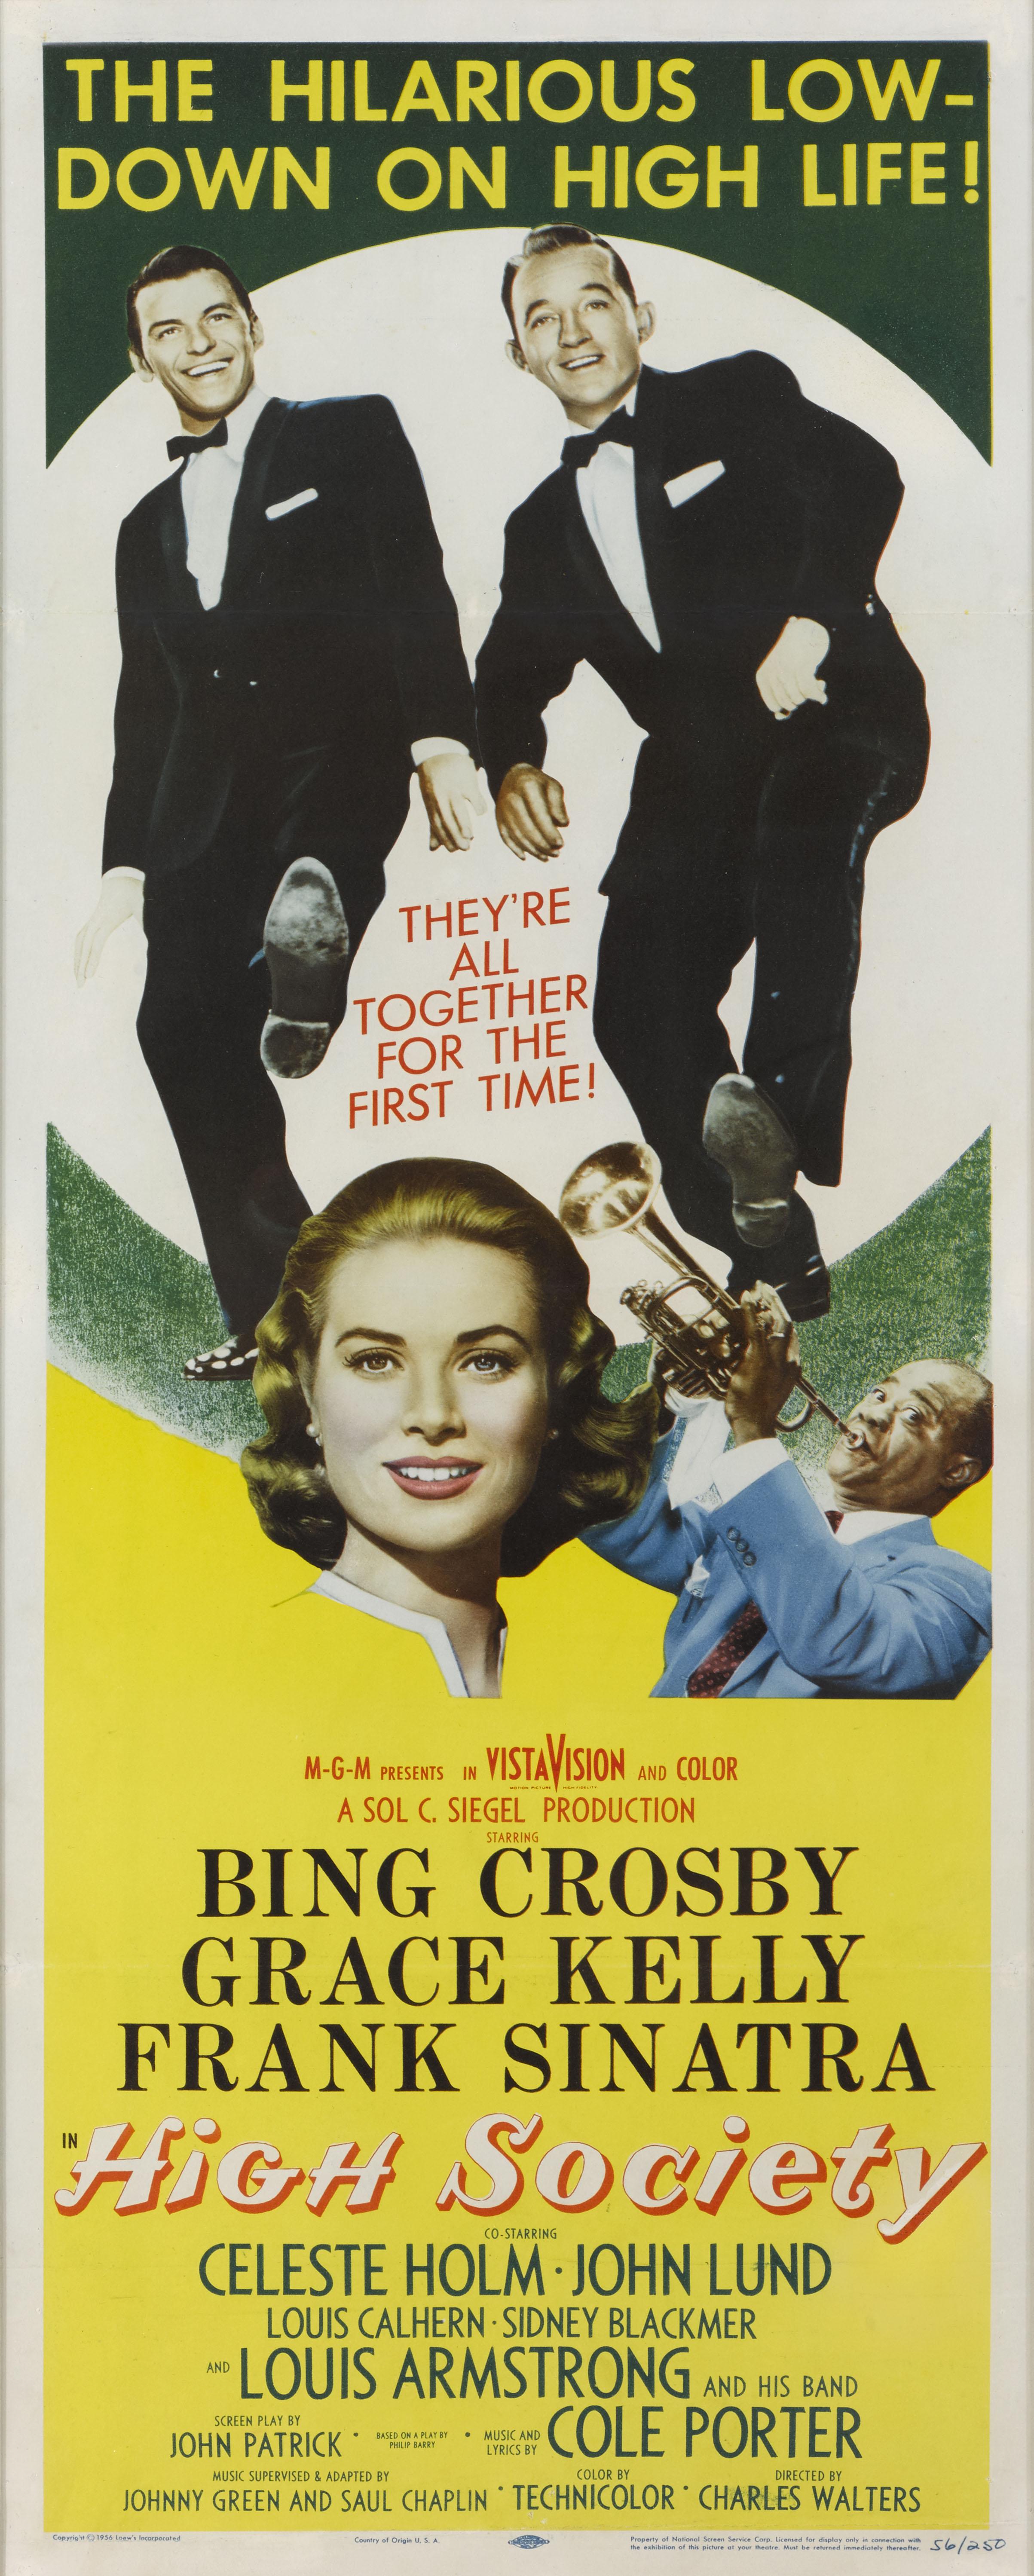 Original US movie poster for the 1956 musical High Society.
This wonderful musical was a remake of the 1941 film The Philadelphia Story, starring Frank Sinatra, Bing Crosby, Grace Kelly and Louis Armstrong. The film has a timeless soundtrack by